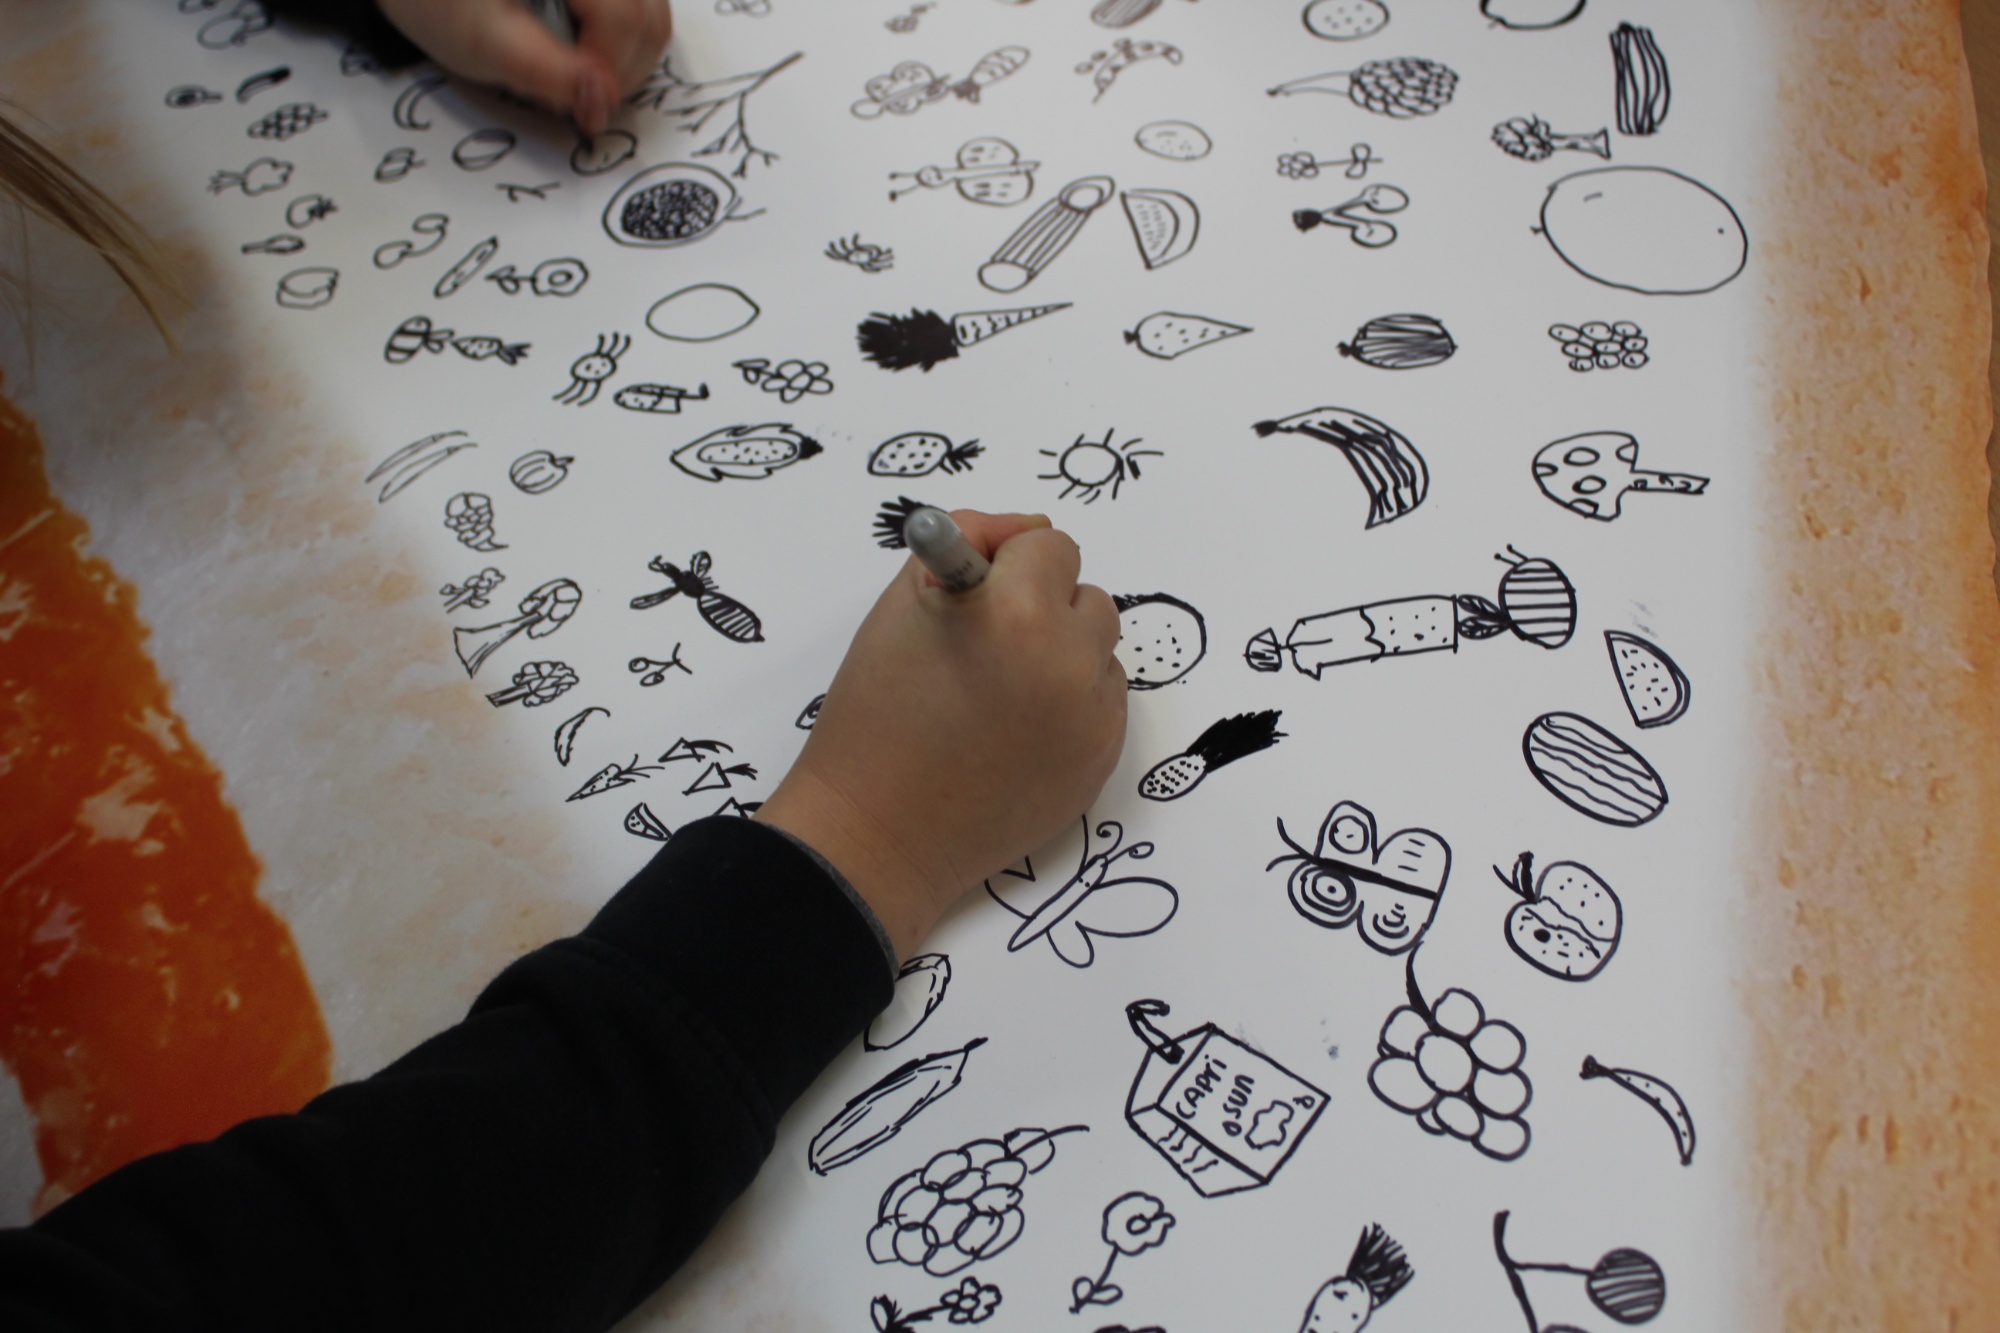 Small hands hold a black Sharpie pen over a page covered in cartoon-like drawings